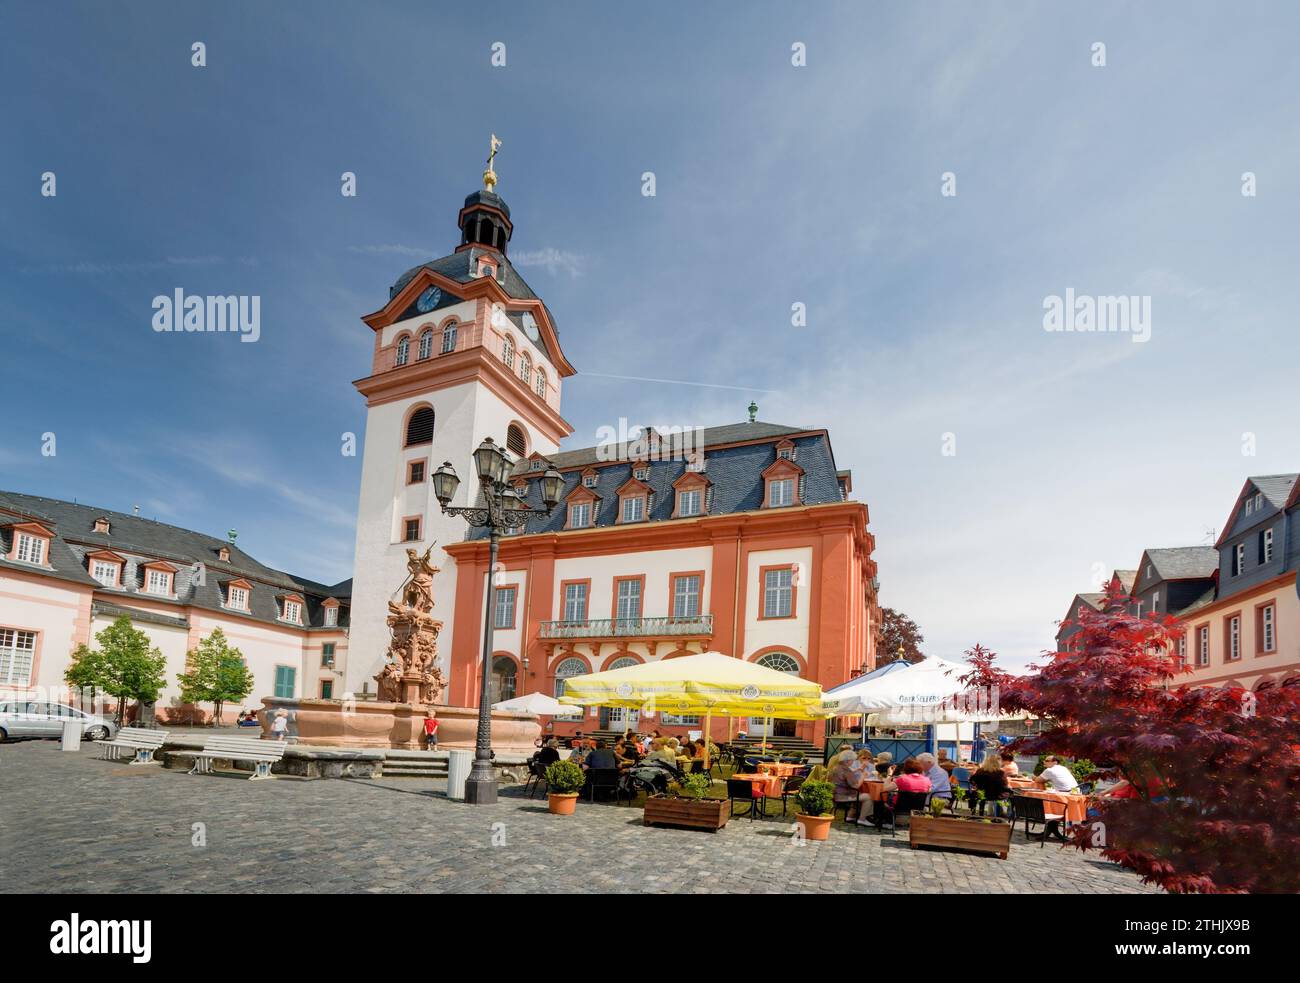 St. George the dragon slayer, city hall at market square, Weilburg an der Lahn, Hesse, Germany, Europe Stock Photo